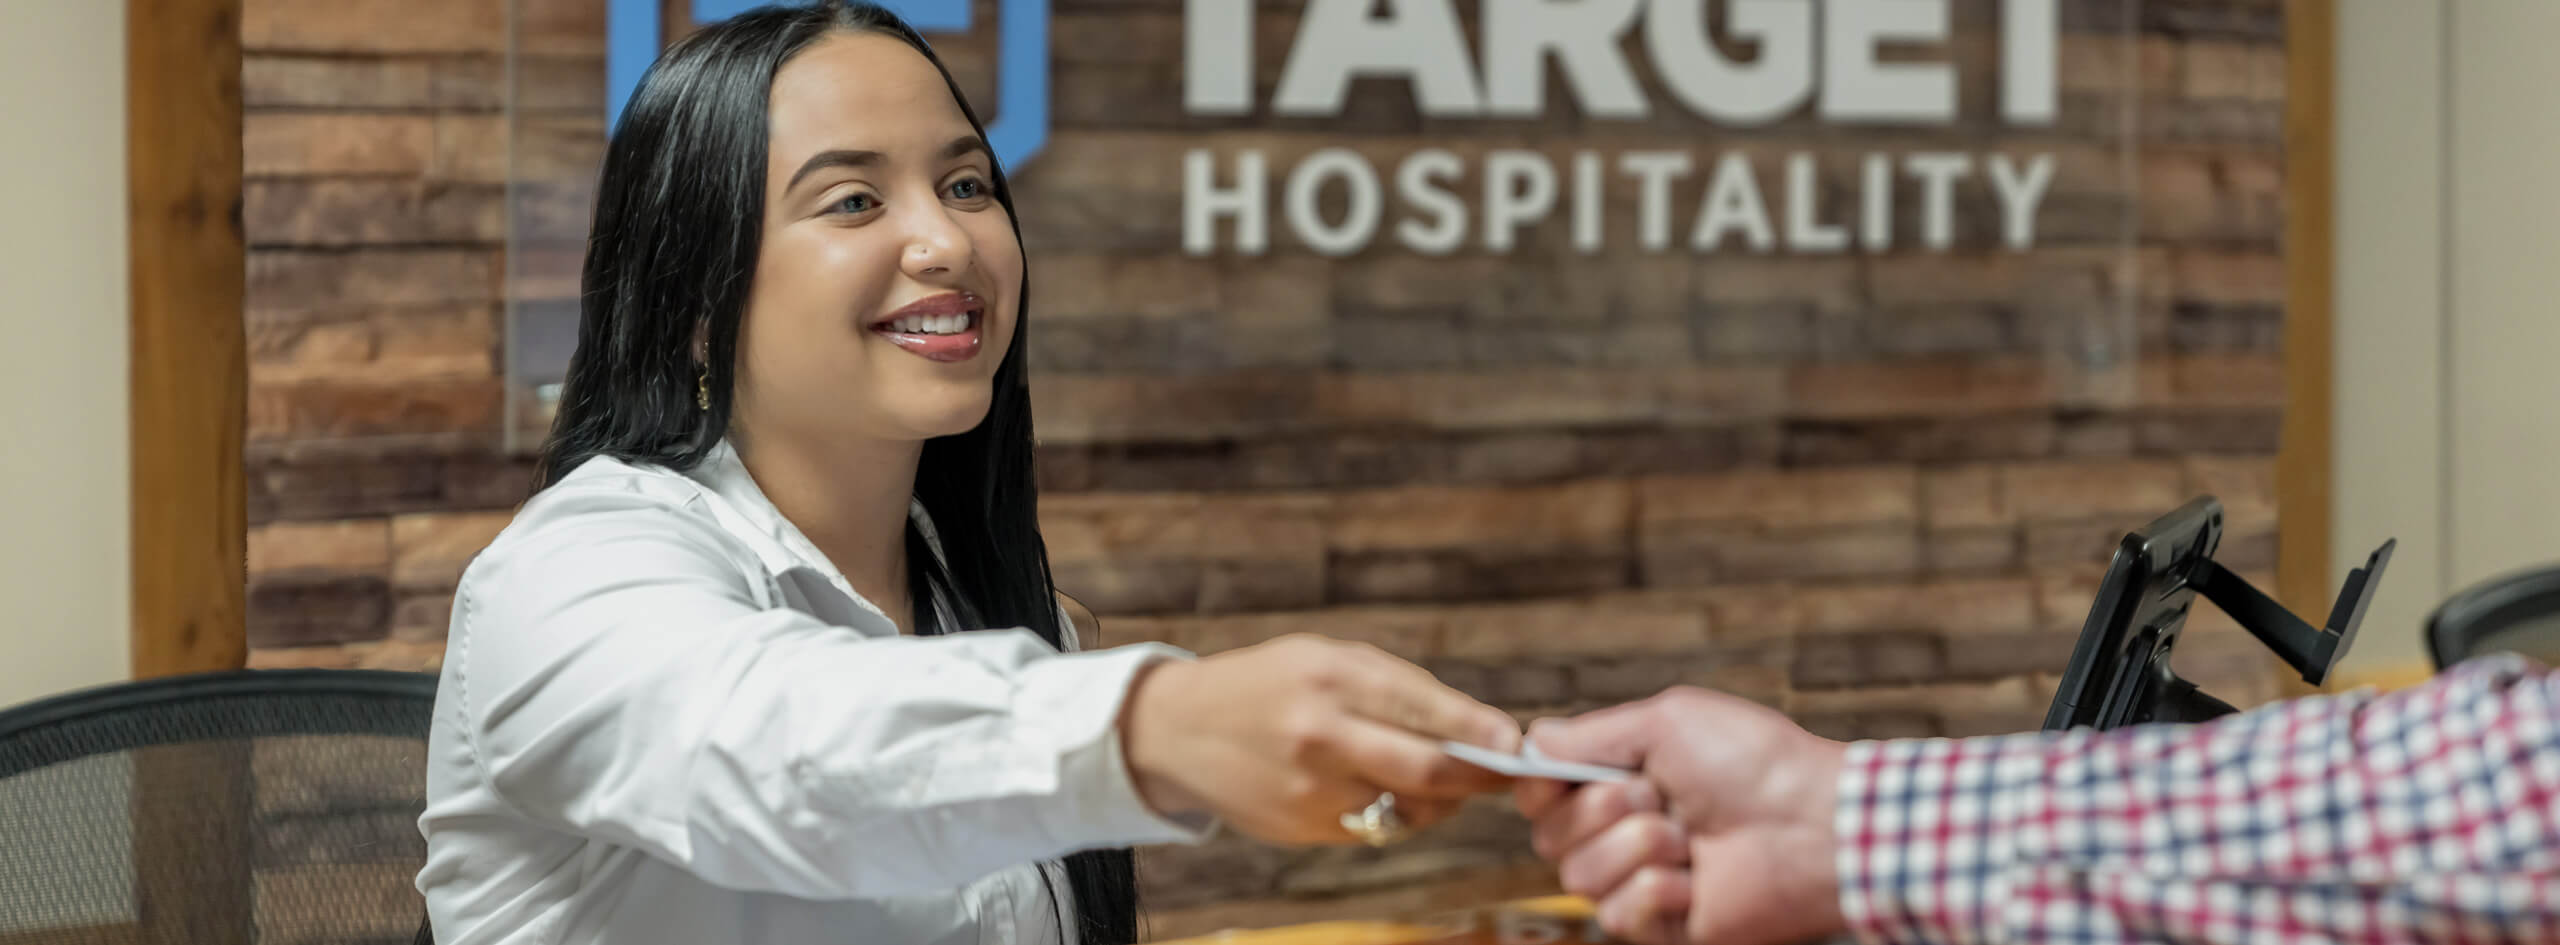 Target Hospitality is a trusted partner to private industry and government sectors.